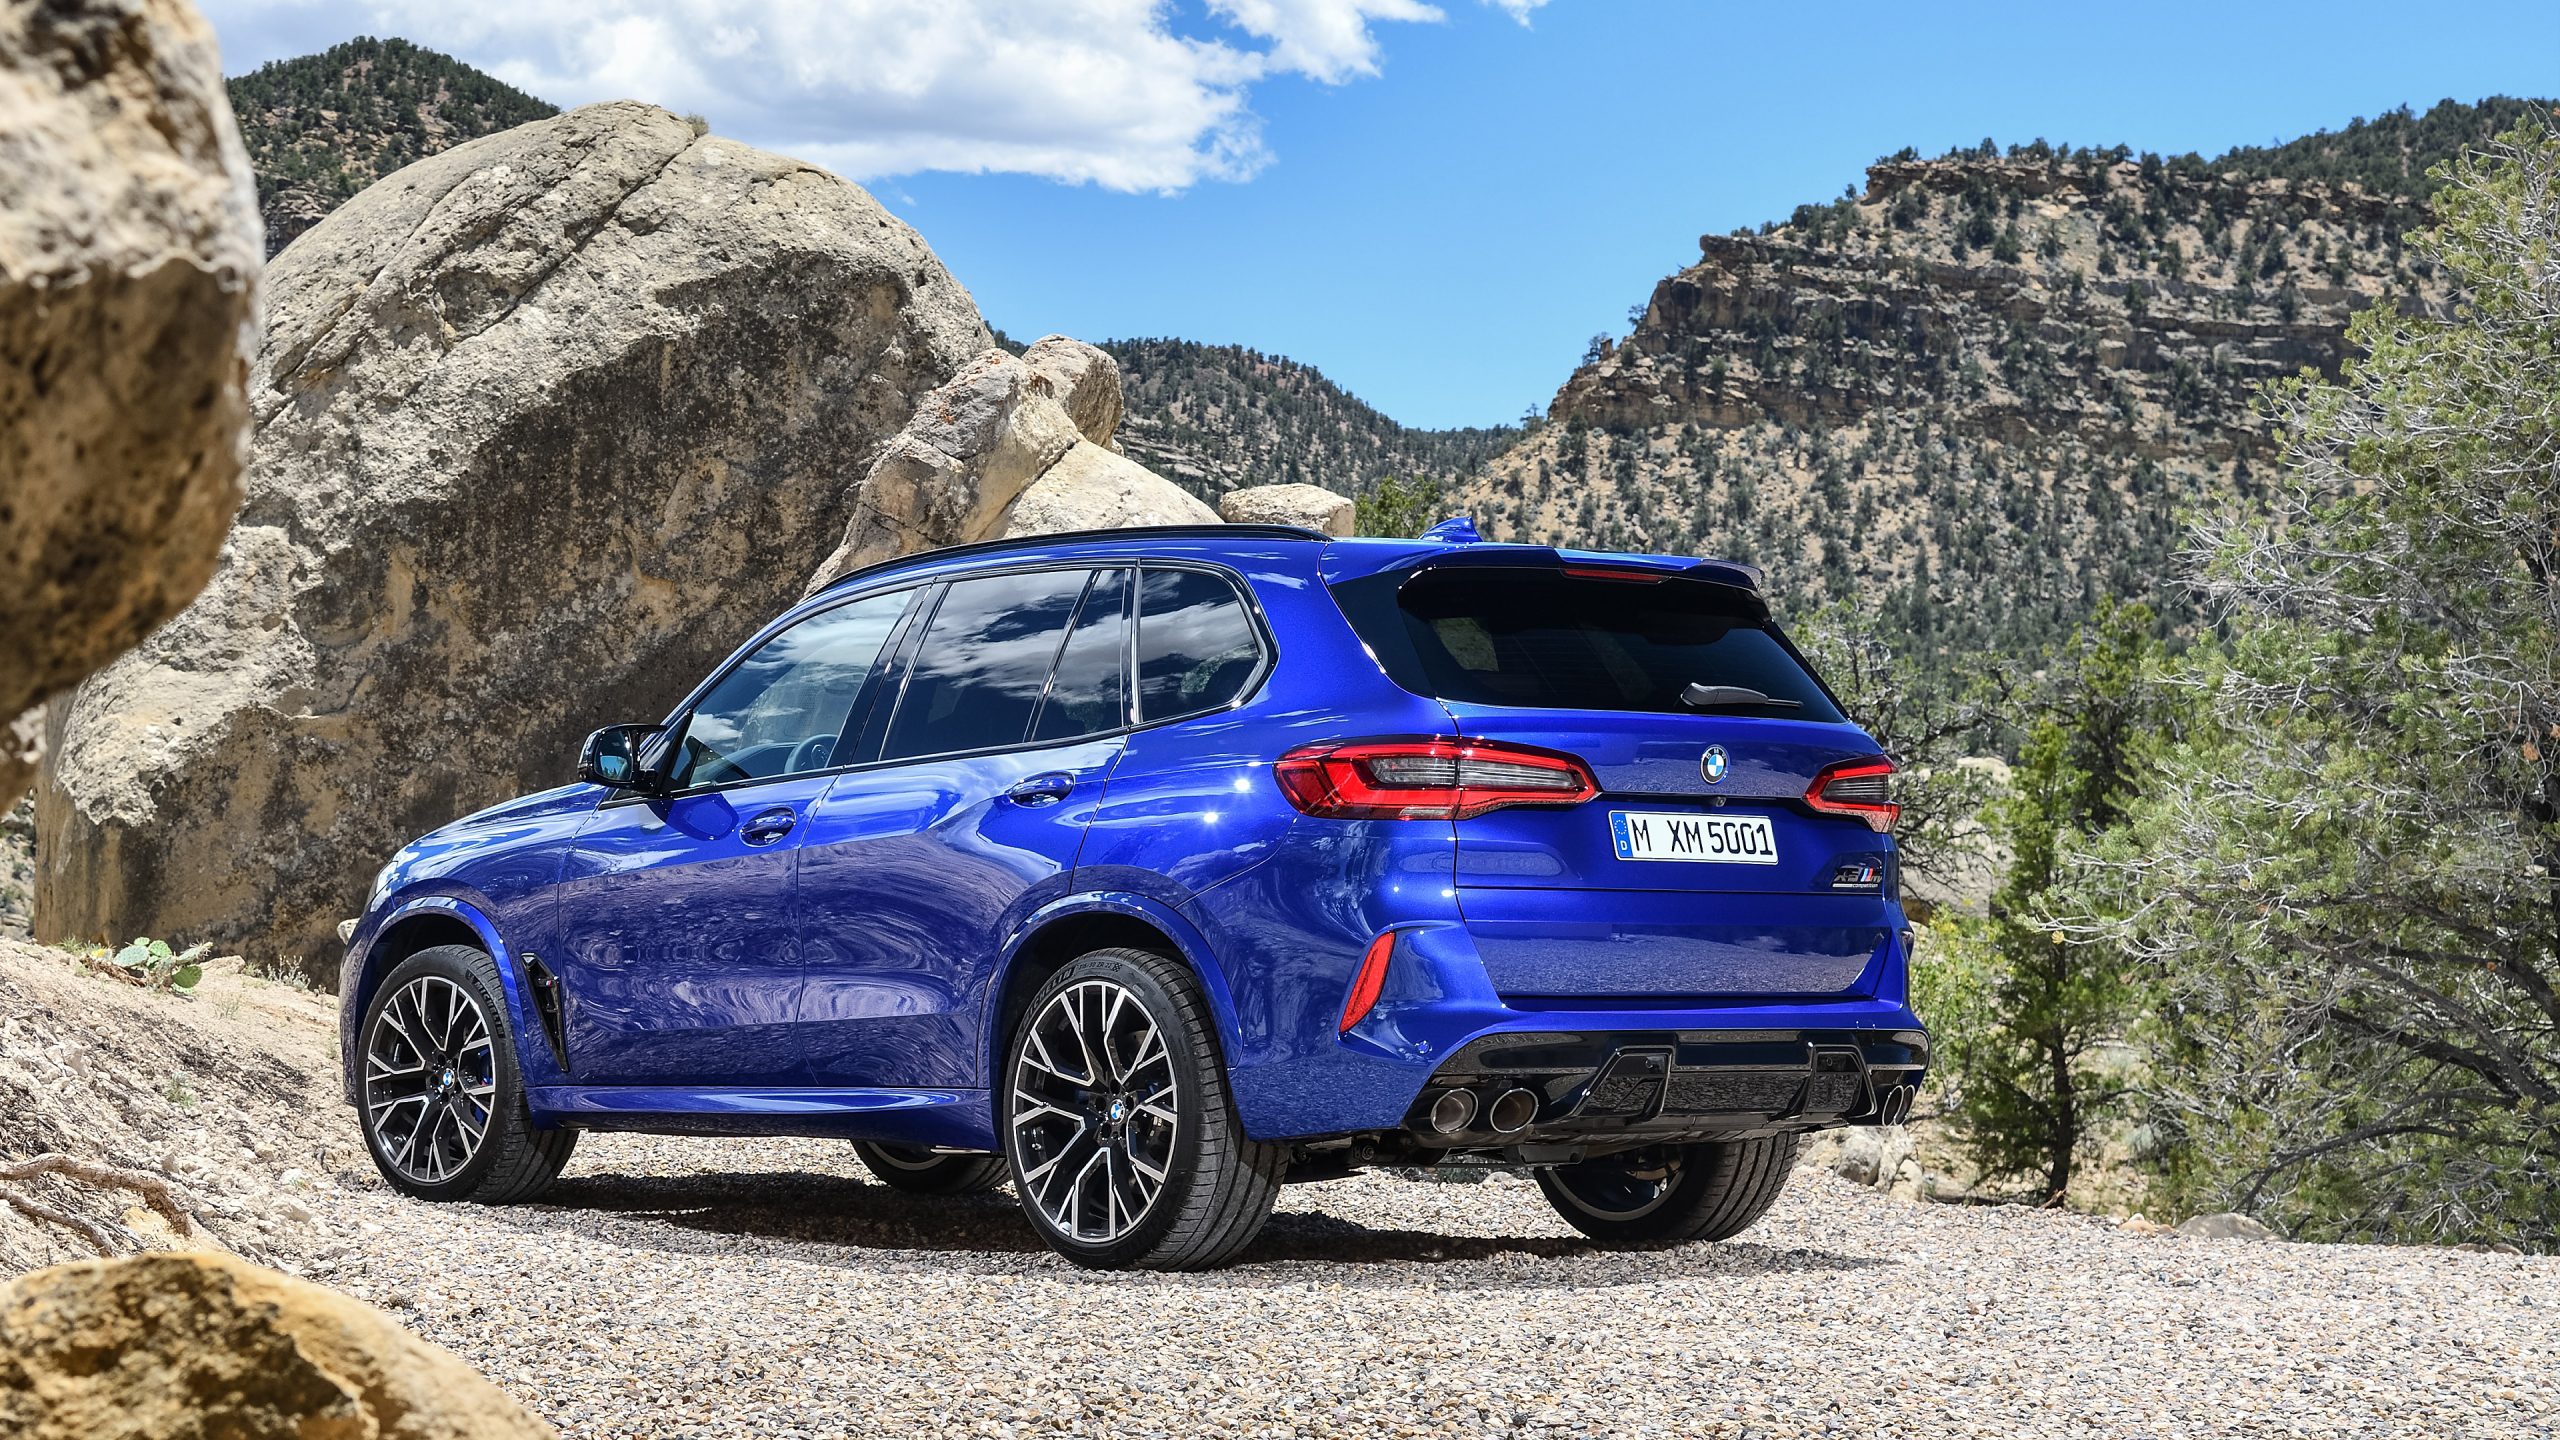 2020 BMW X5 M Competition Wallpapers2020 BMW X5 M Competition Wallpaper Collection